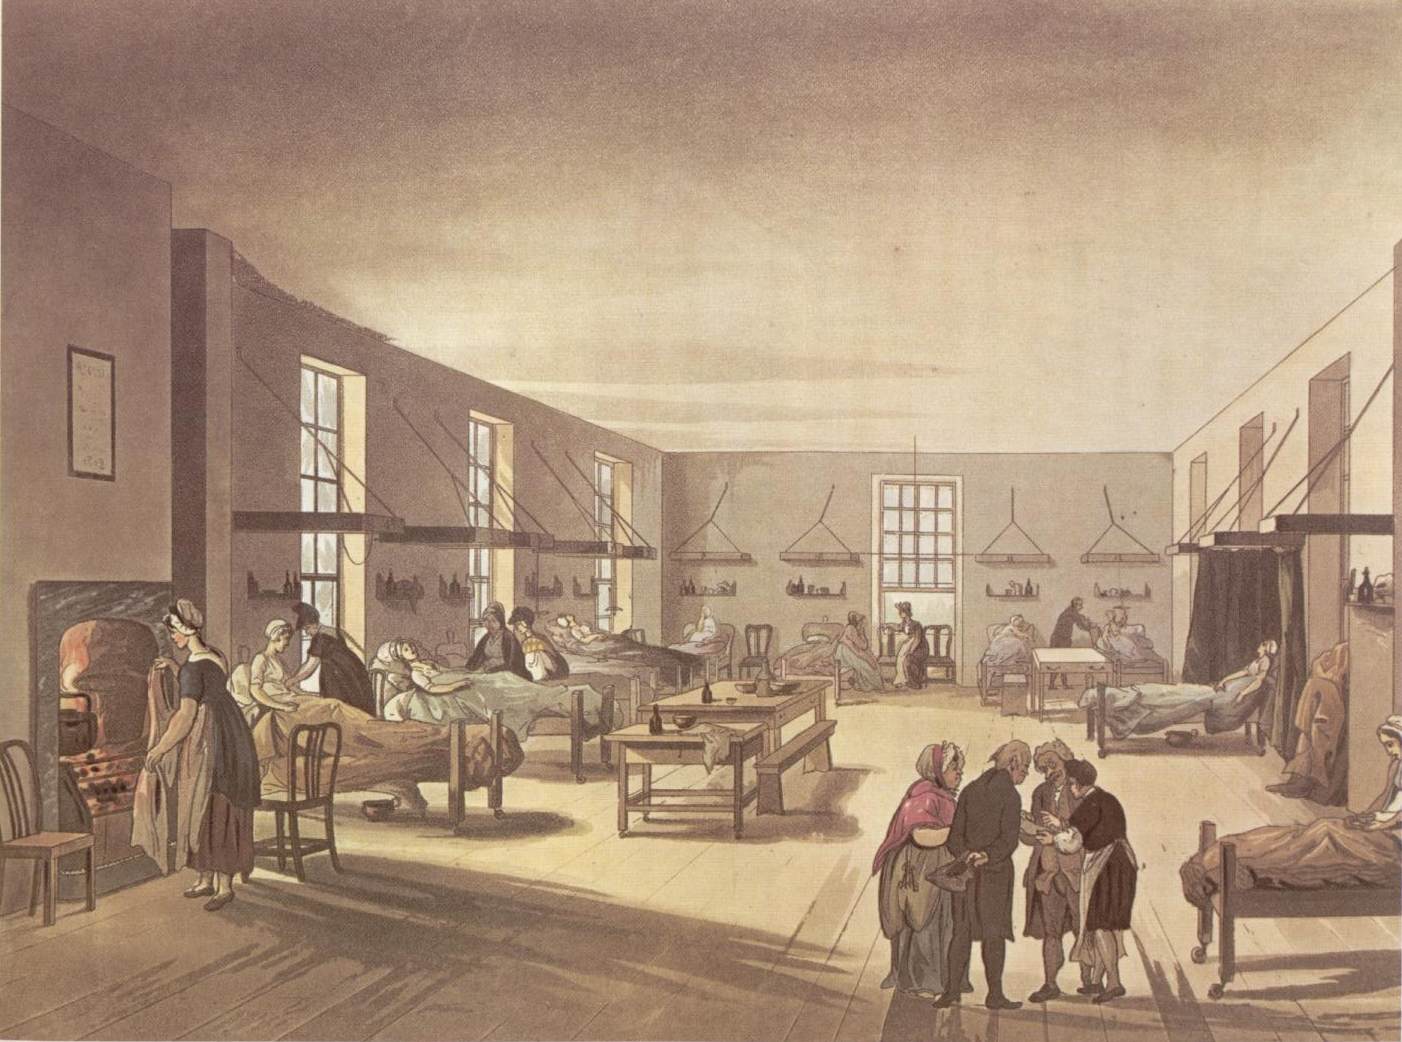 A scene on a woman's ward in a hospital.  Beds are distributed against the walls, with patients lying in most of them.  A group of two men and two men are consulting over papers in the foreground, and a further woman is standing before an open fire on the left.